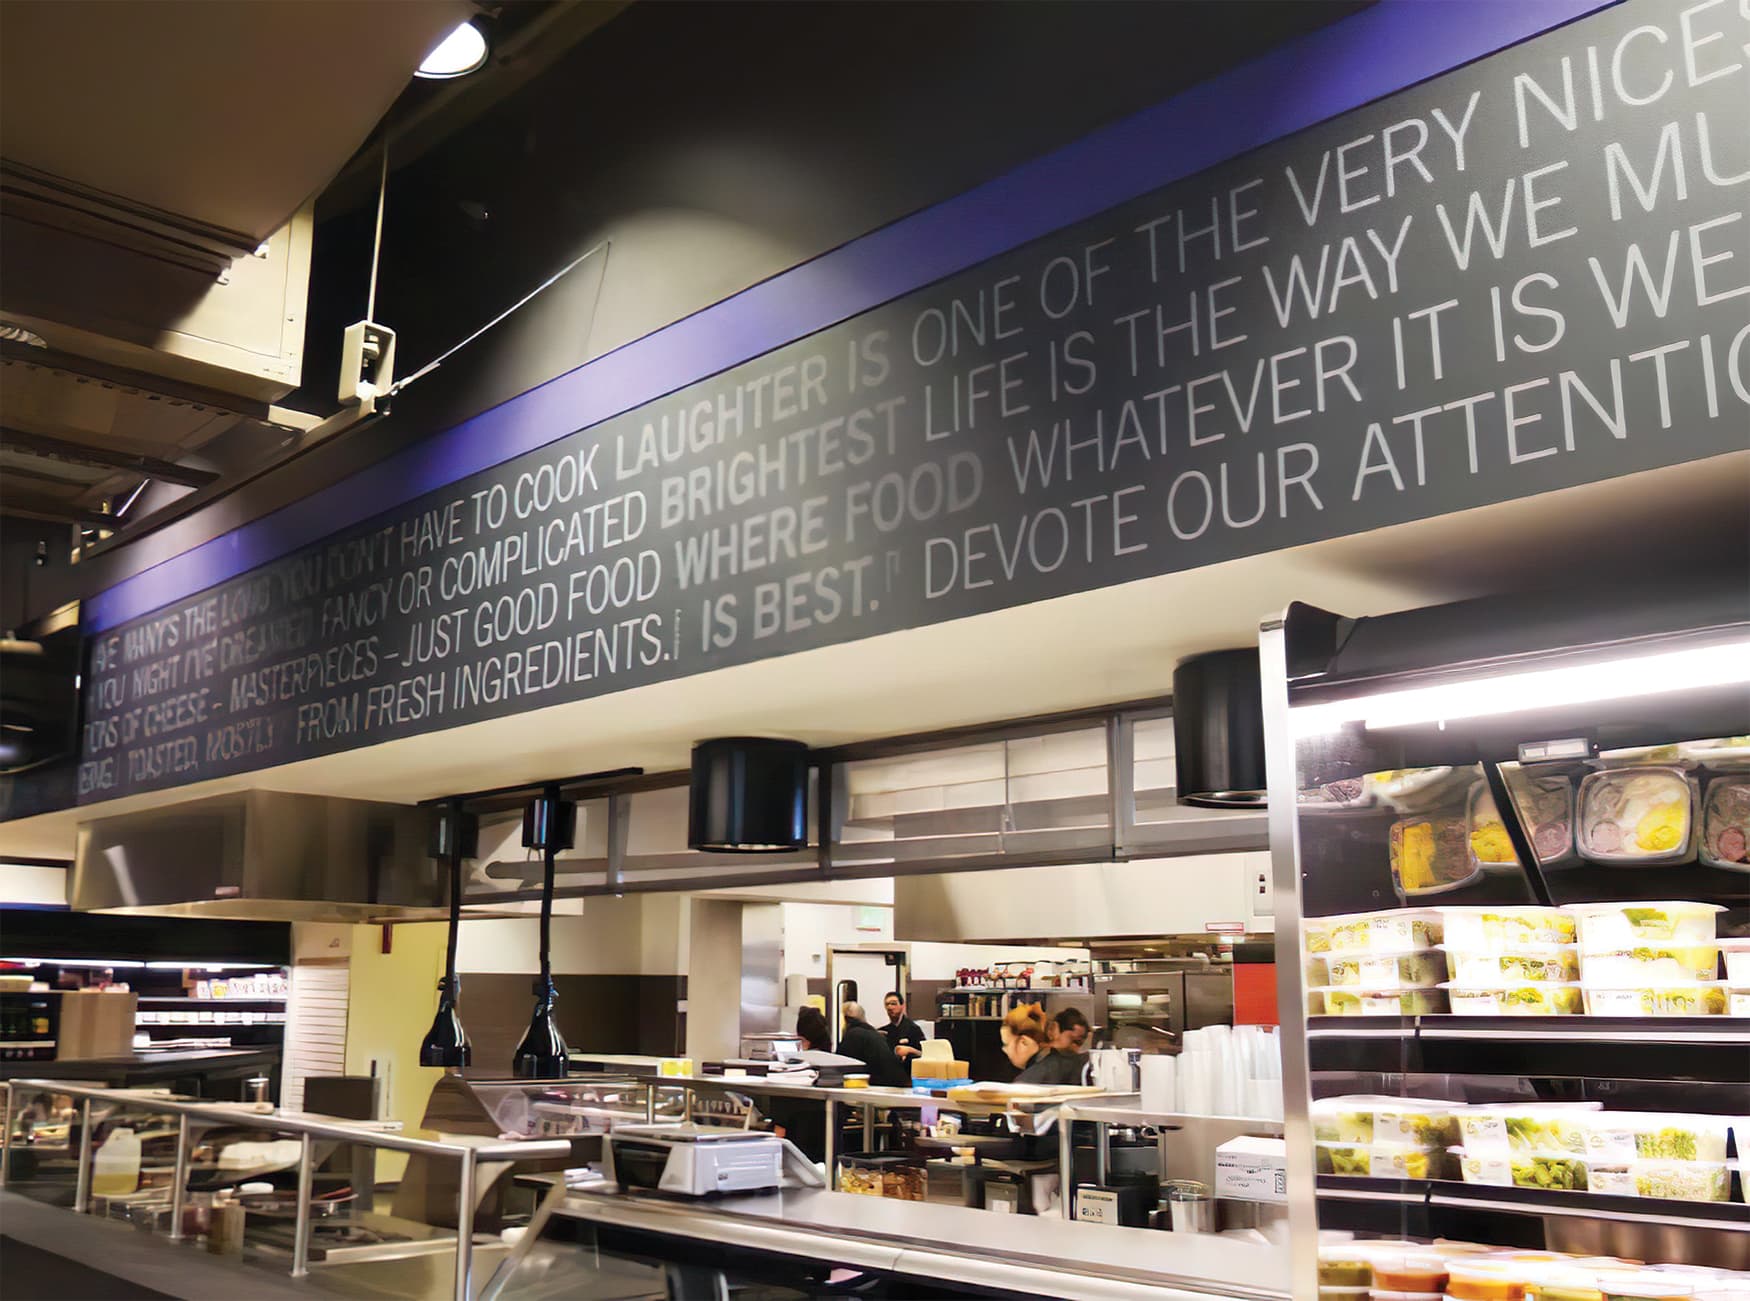 District Market, a student market located by the University of Washington's campus. Environmental Graphics.